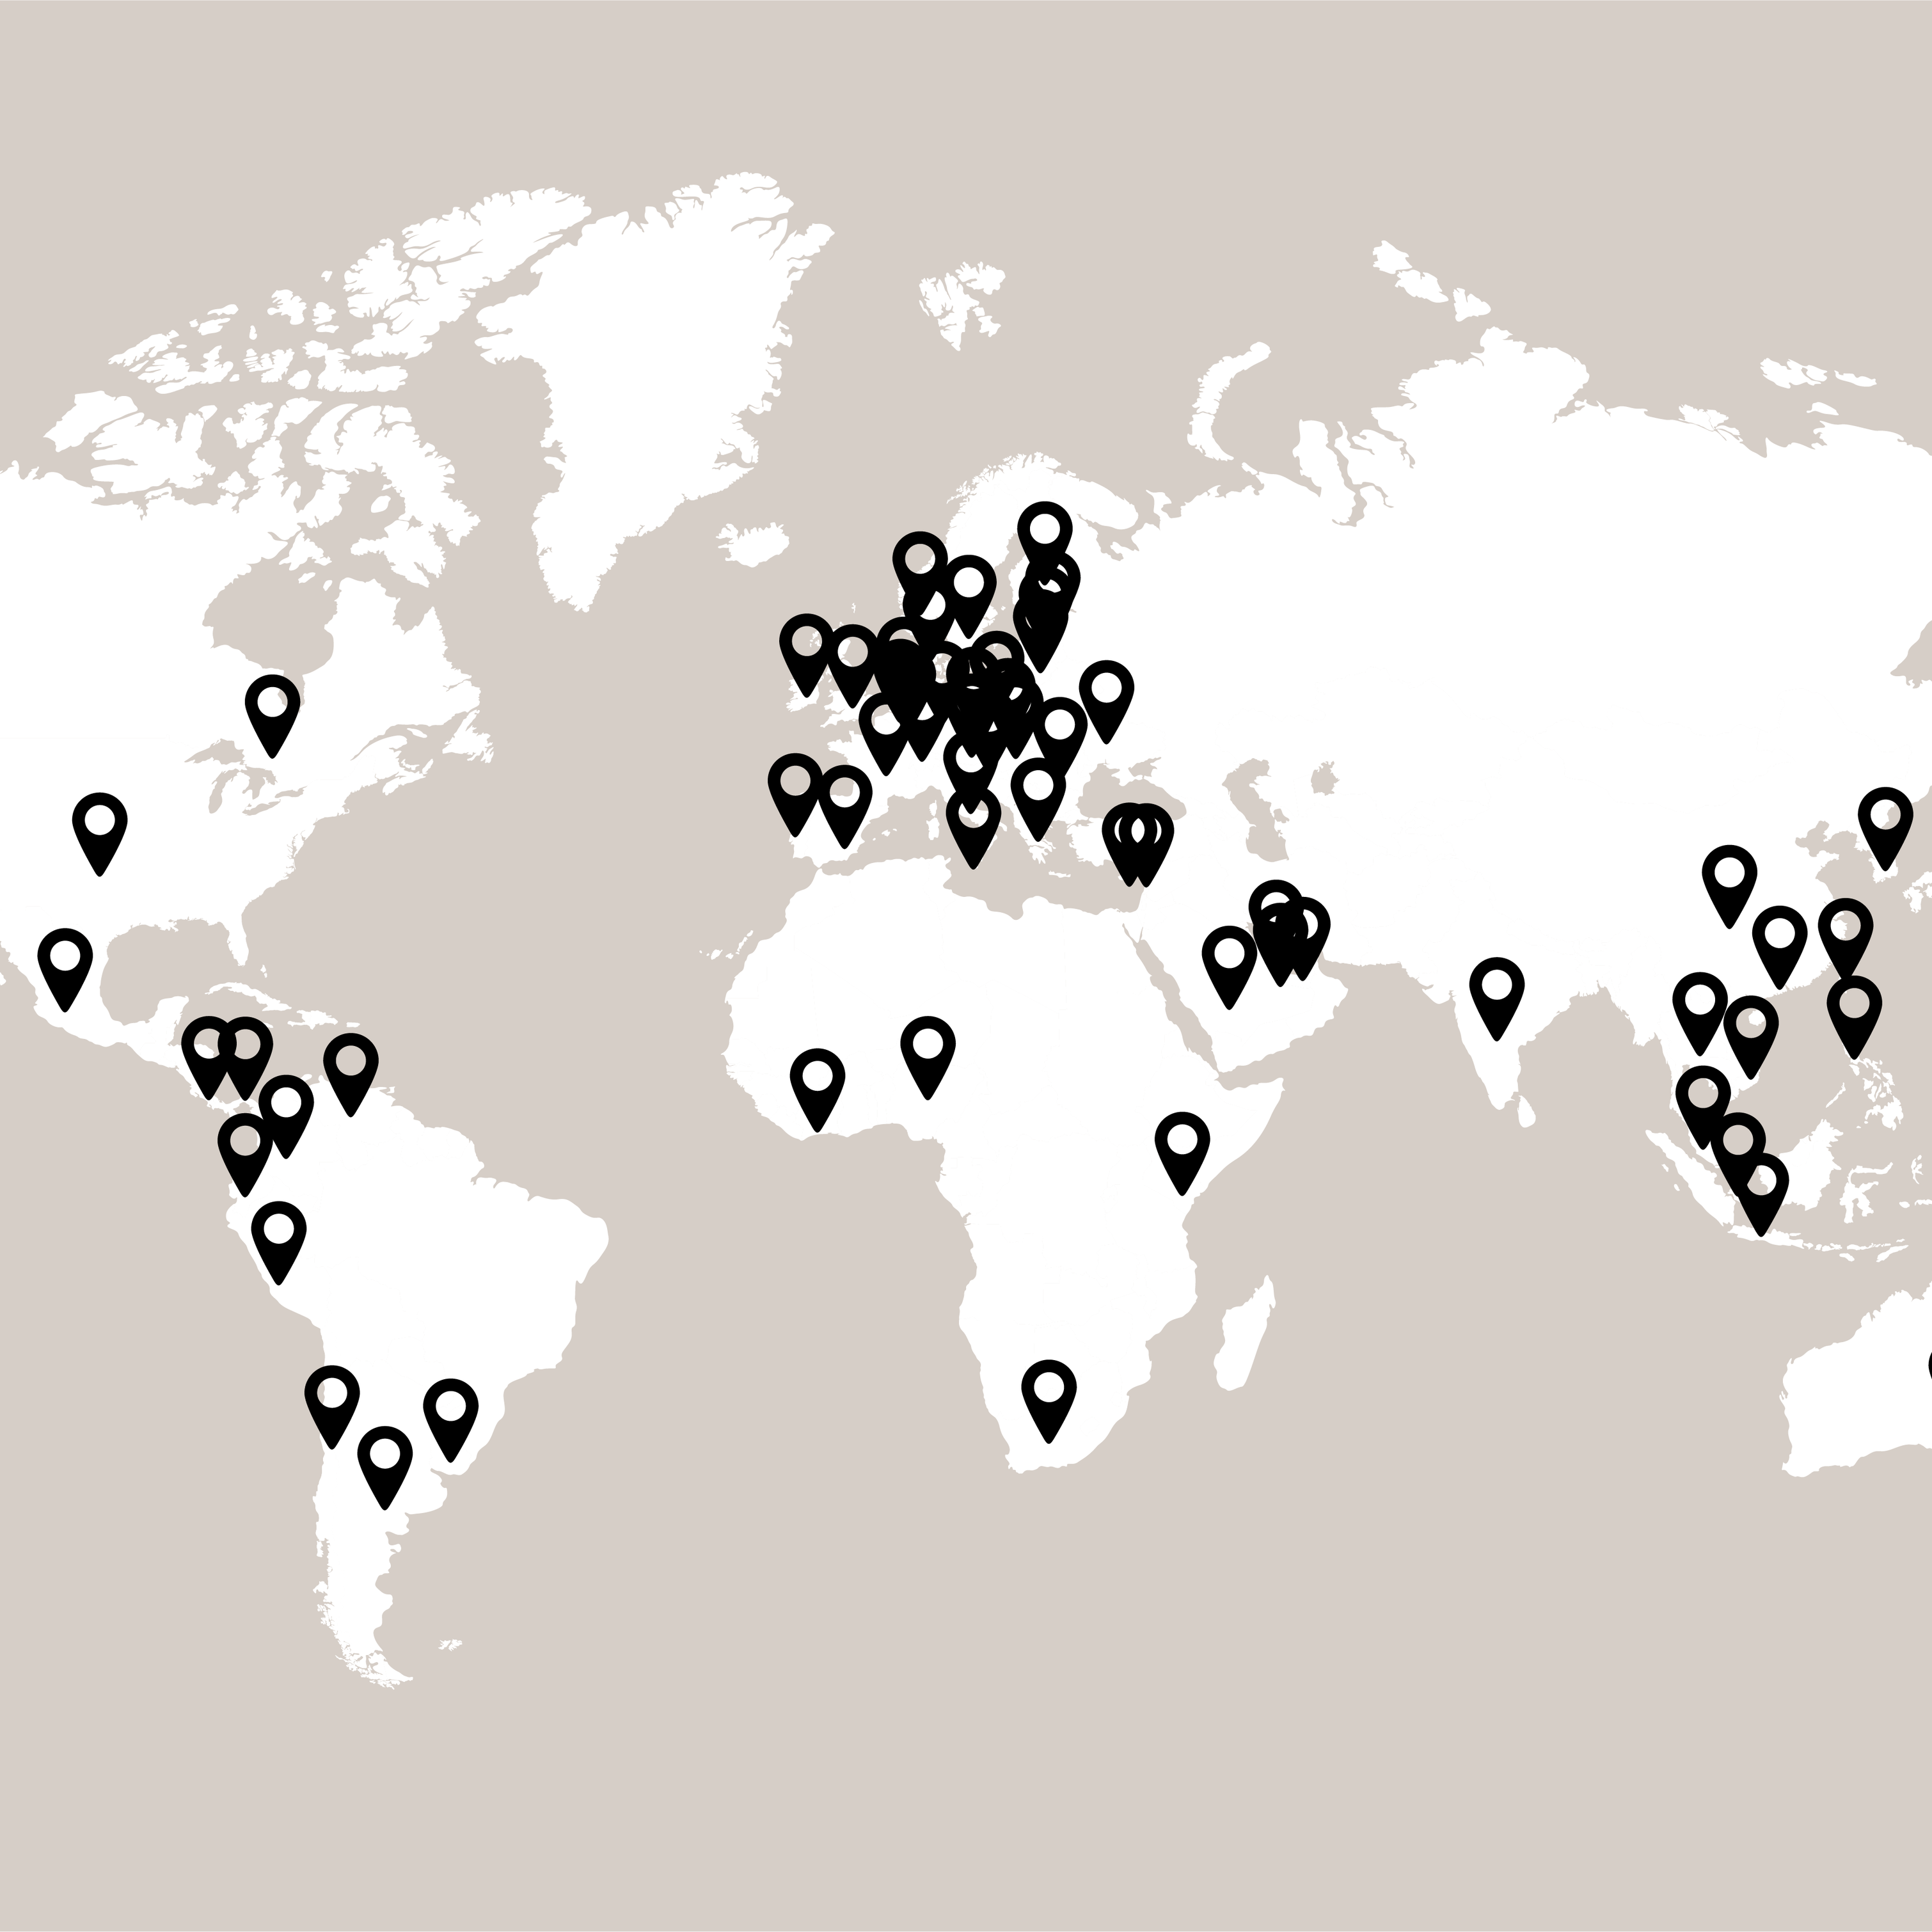 Worldmap containing location markers for BoConcept stores around the world.